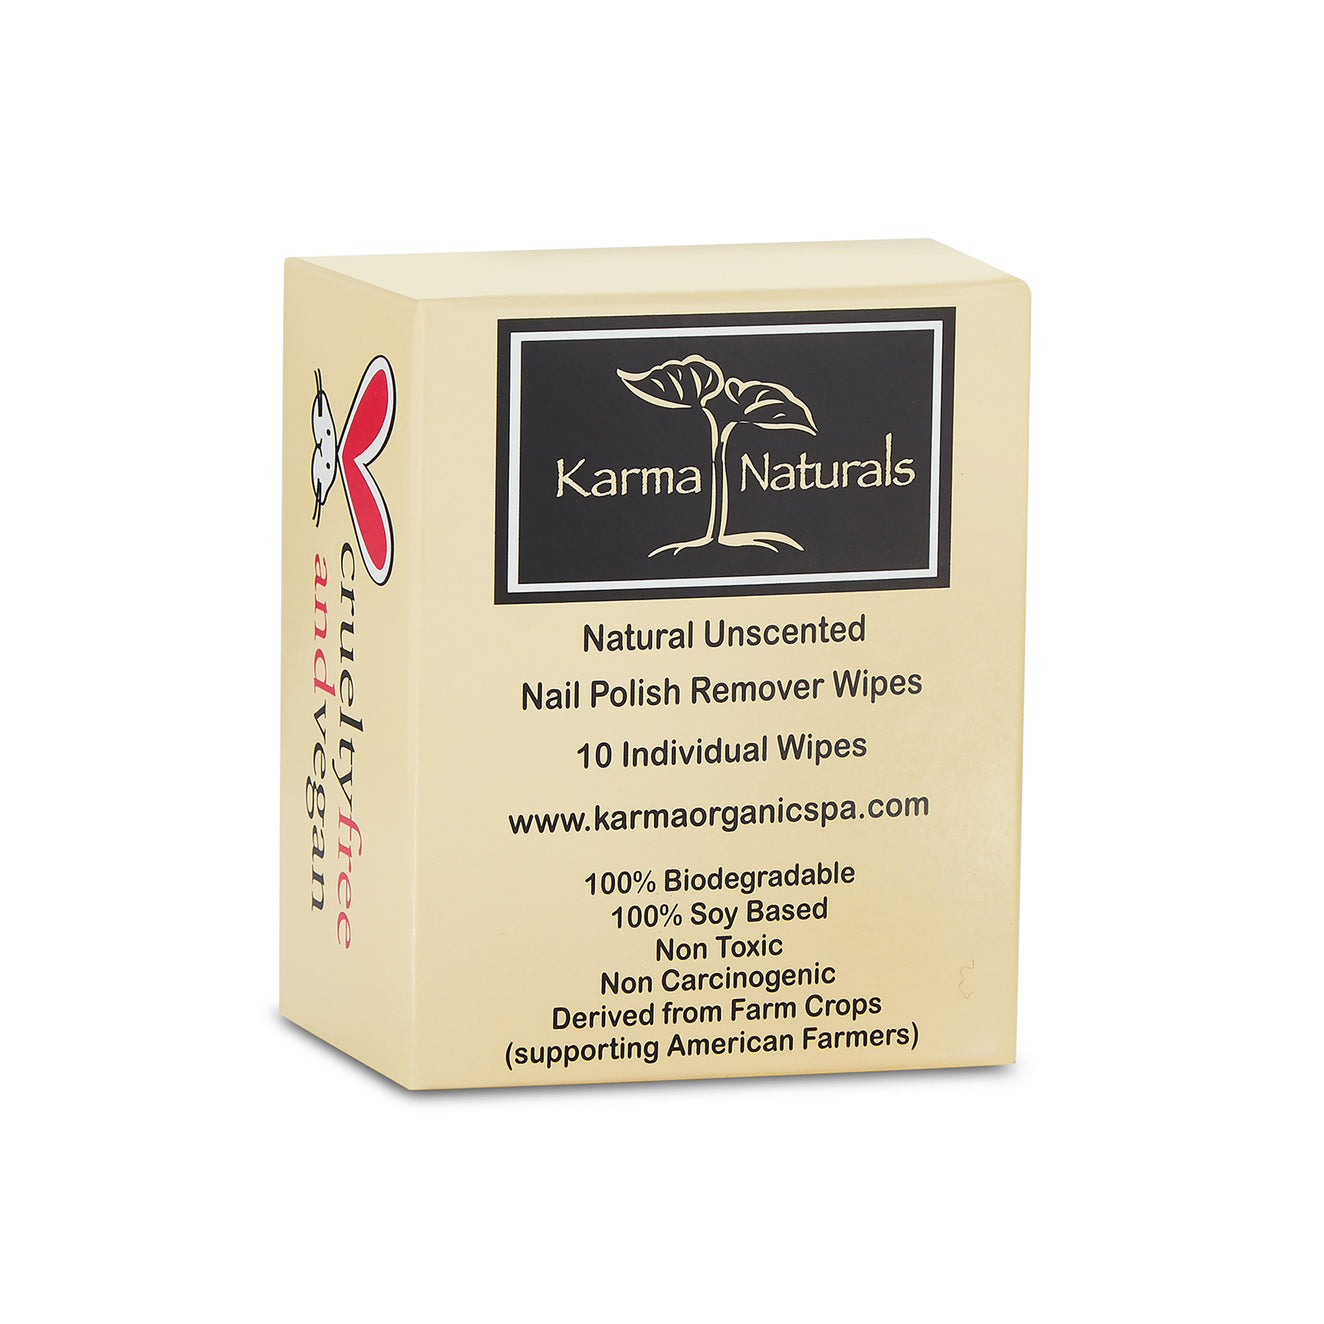 Karma Naturals Unscented Nail Polish Remover Wipes -1 Pack of 10 Individually Wrapped Wipes